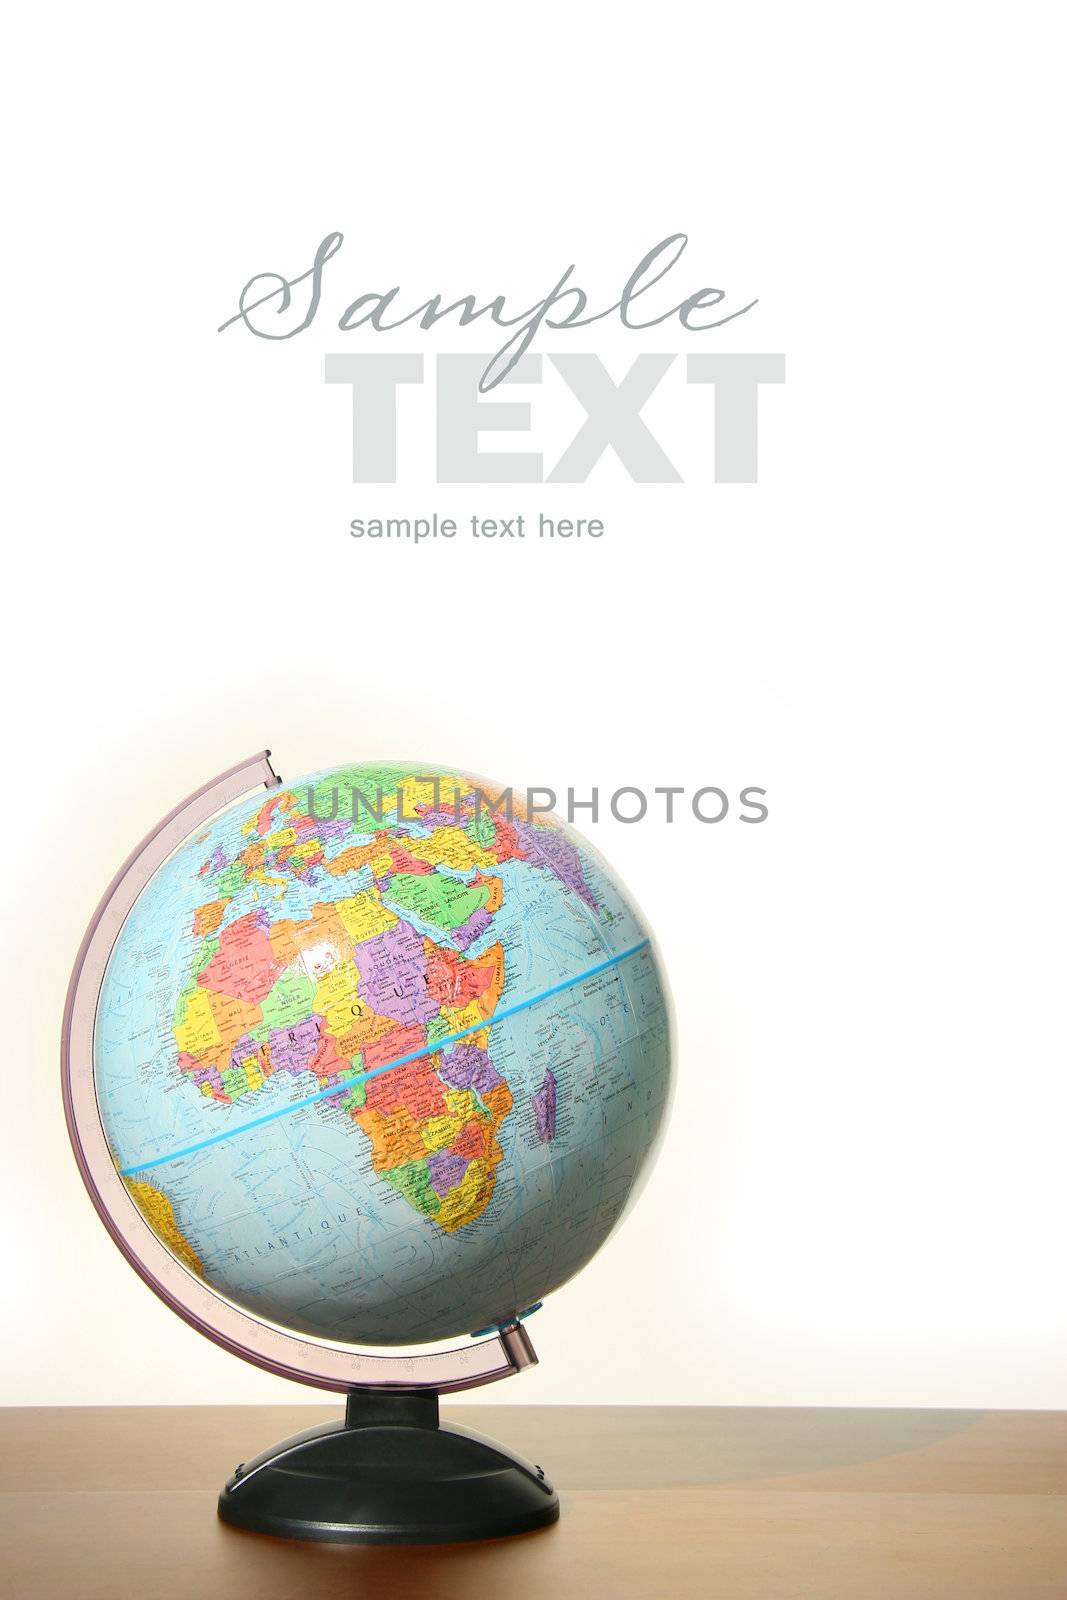 Globe with stand on desk against white background